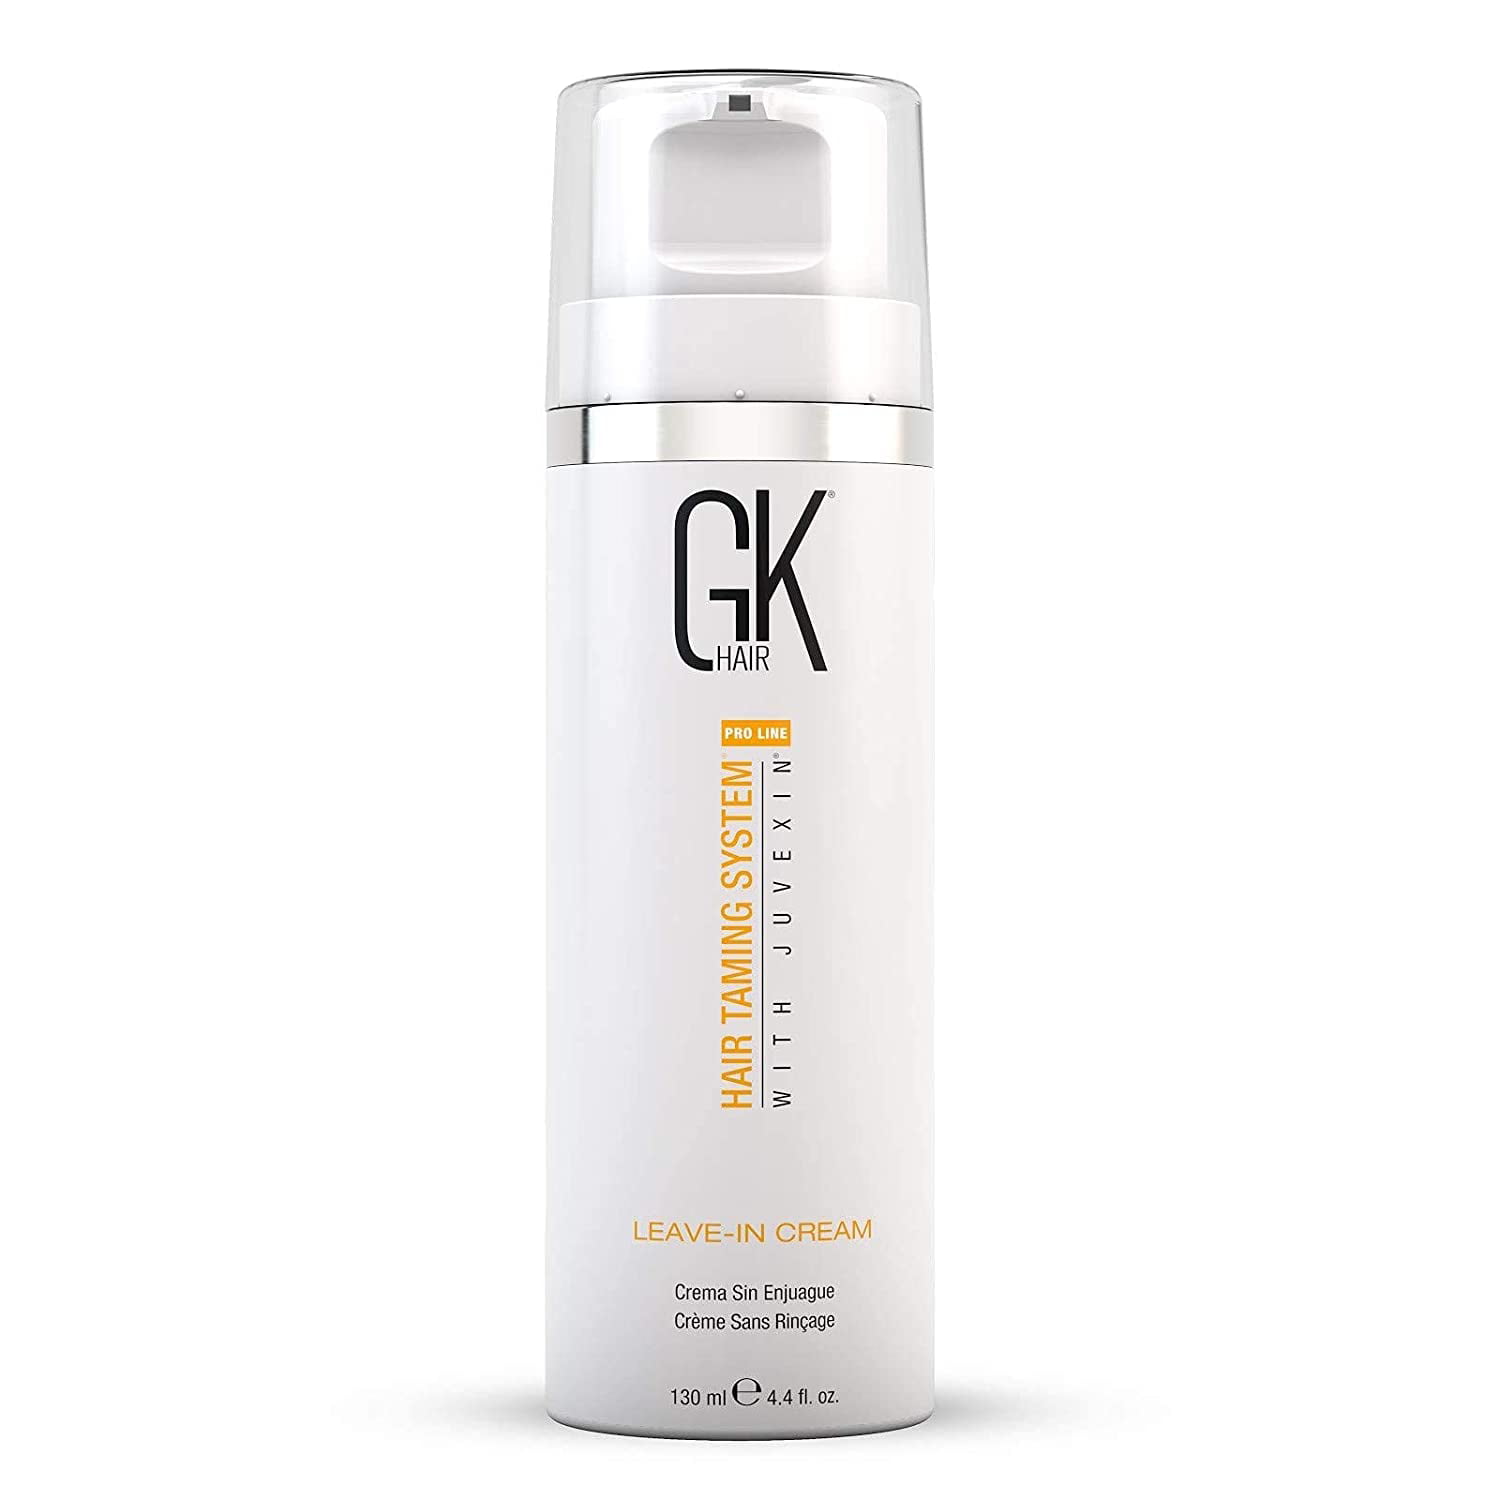 GK HAIR Global Keratin Leave in Cashmere Hair Smoothing and Styling Cream  169 Fl Oz50ml Argan Oil for AntiFrizz Sleek Shine and Hydrates Dry  Damaged and Unmanageable Hair Repair  Walmartcom